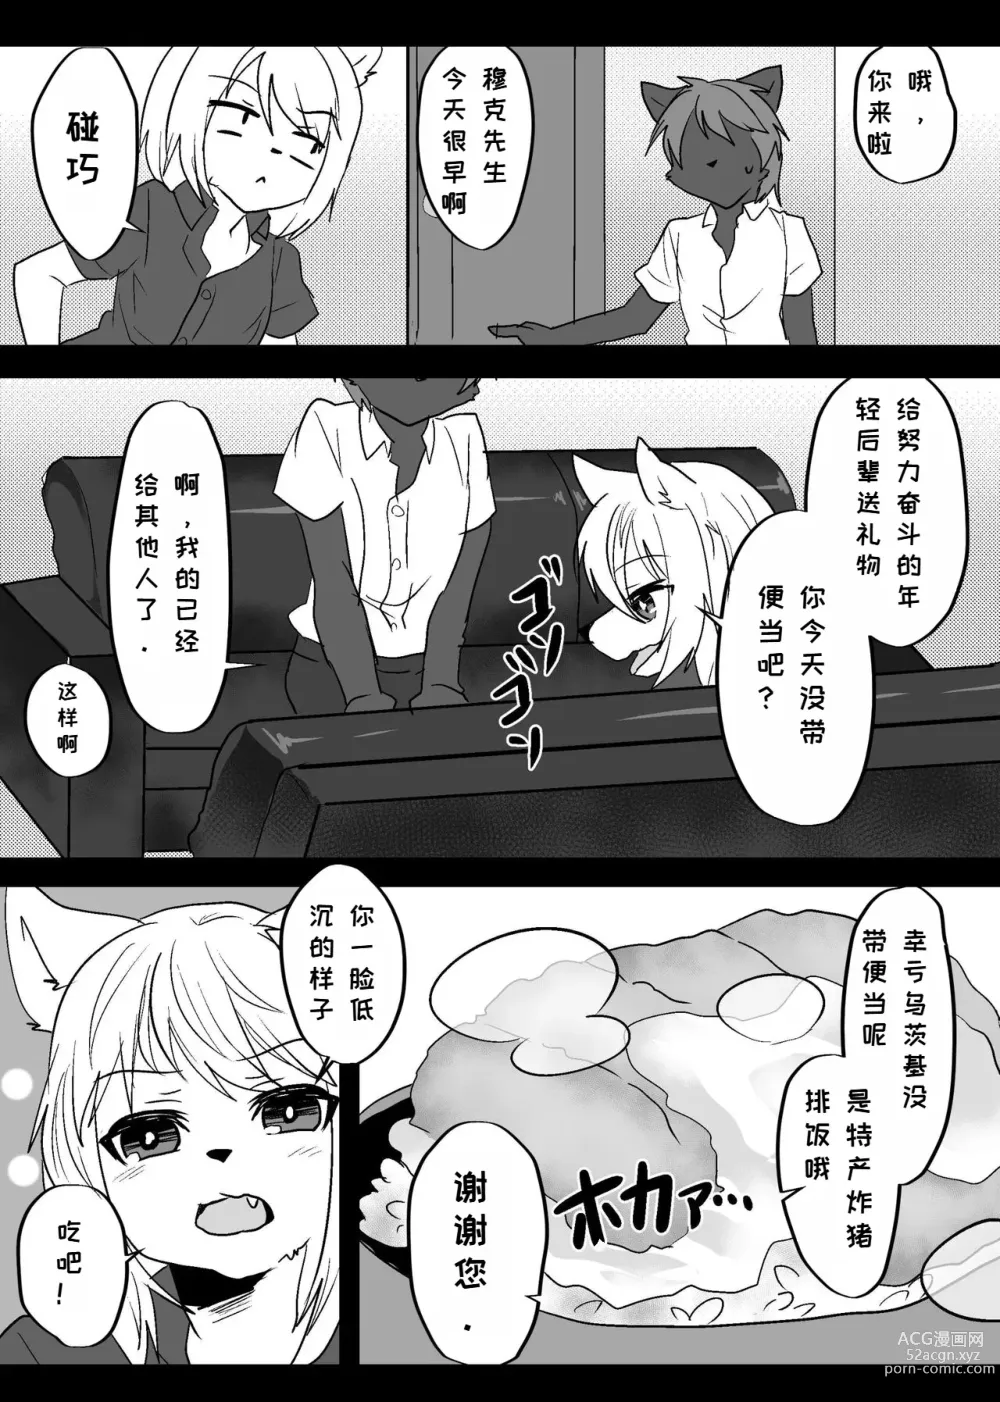 Page 14 of doujinshi 我们发情出勤科 2